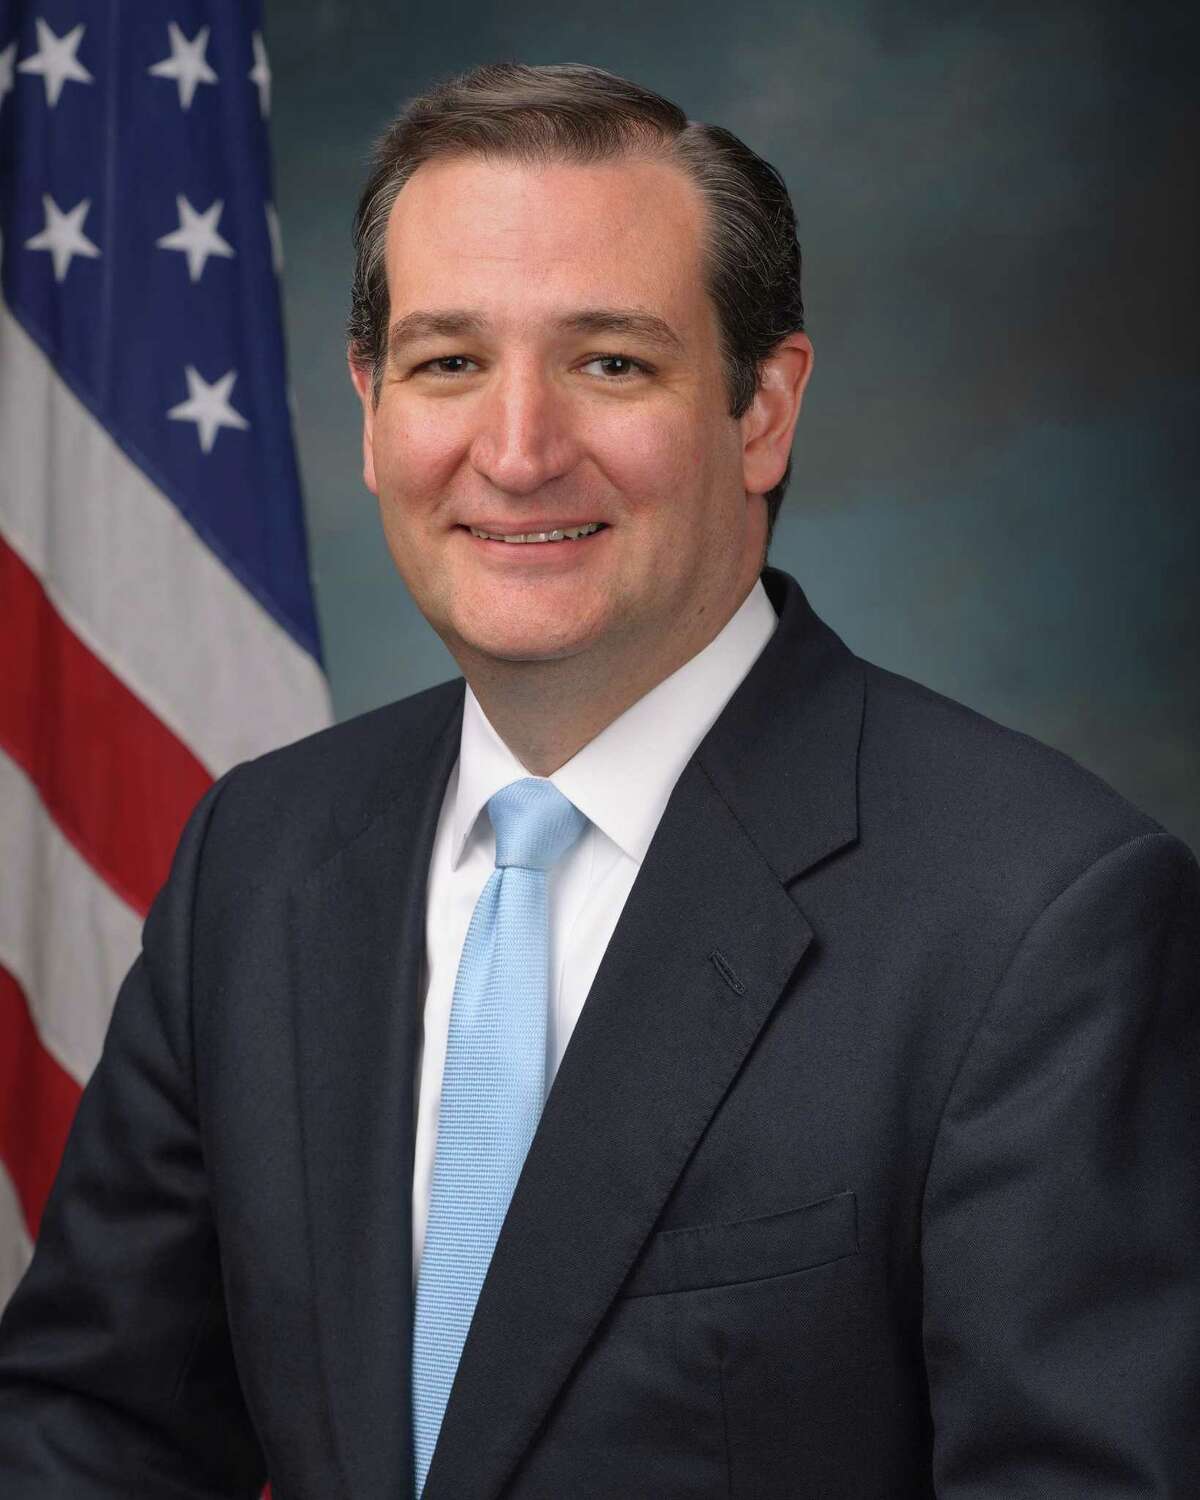 Senator Ted Cruz will visit Cleveland on April 8. He is one of the guest speakers at the Reagan Dinner hosted by the San Jacinto County Republican Party.